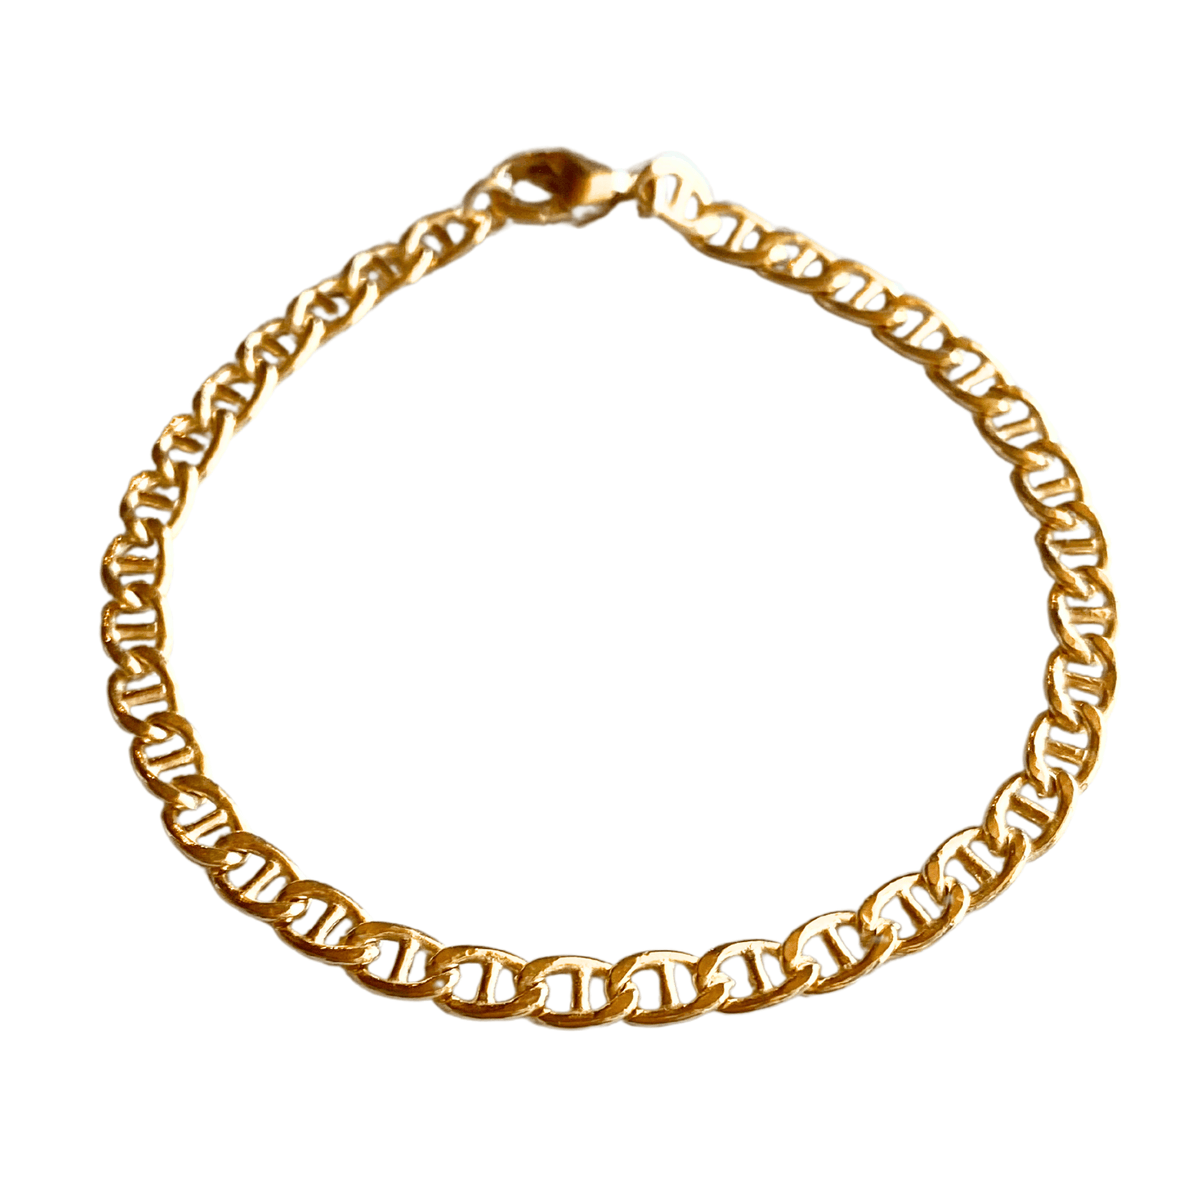 herself collections gold chain bracelet